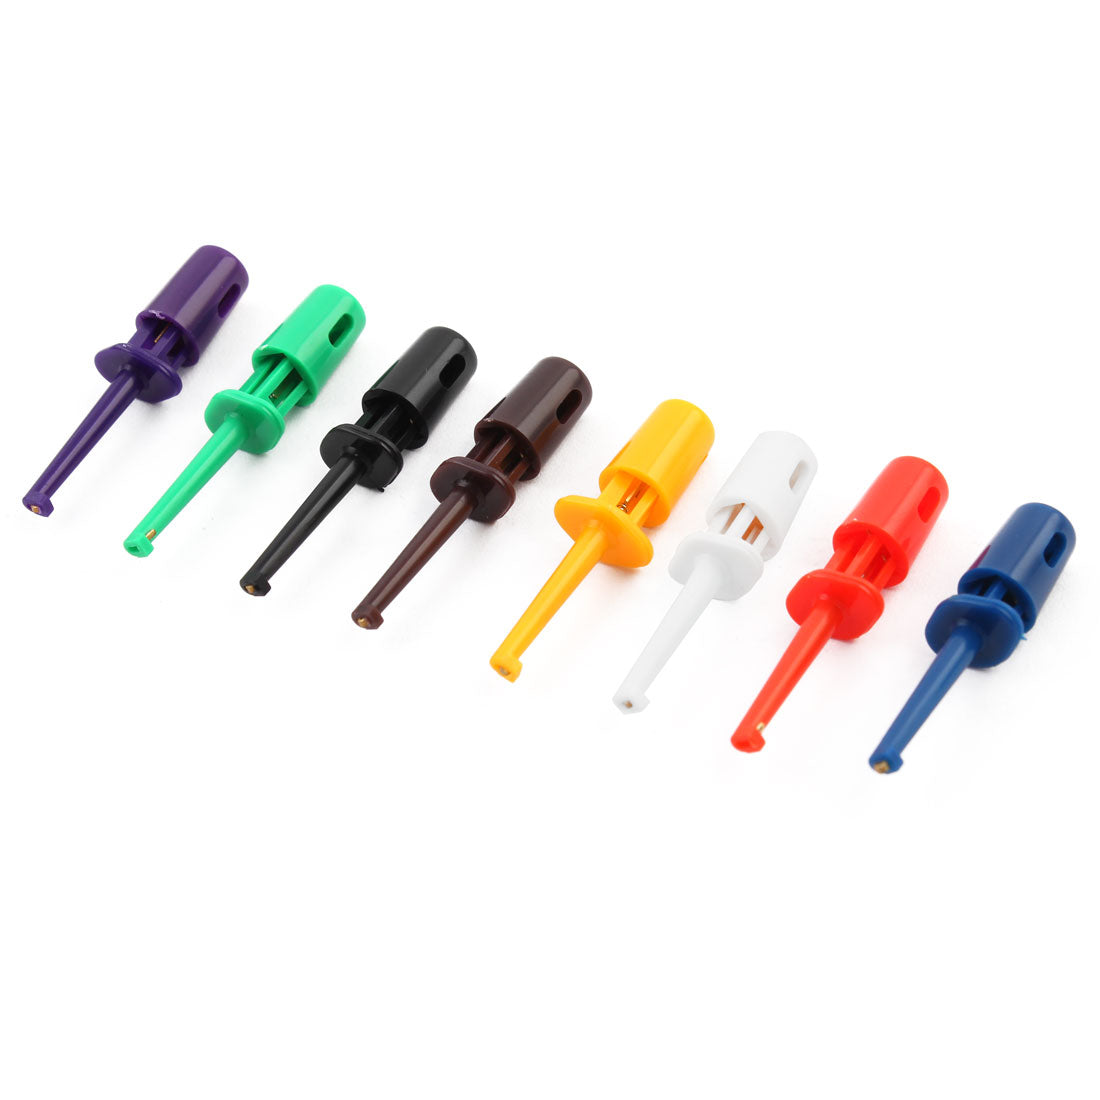 uxcell Uxcell Electrical Meter Part Lead Wire Testing Single Hooks Clip Assorted Color 8pcs